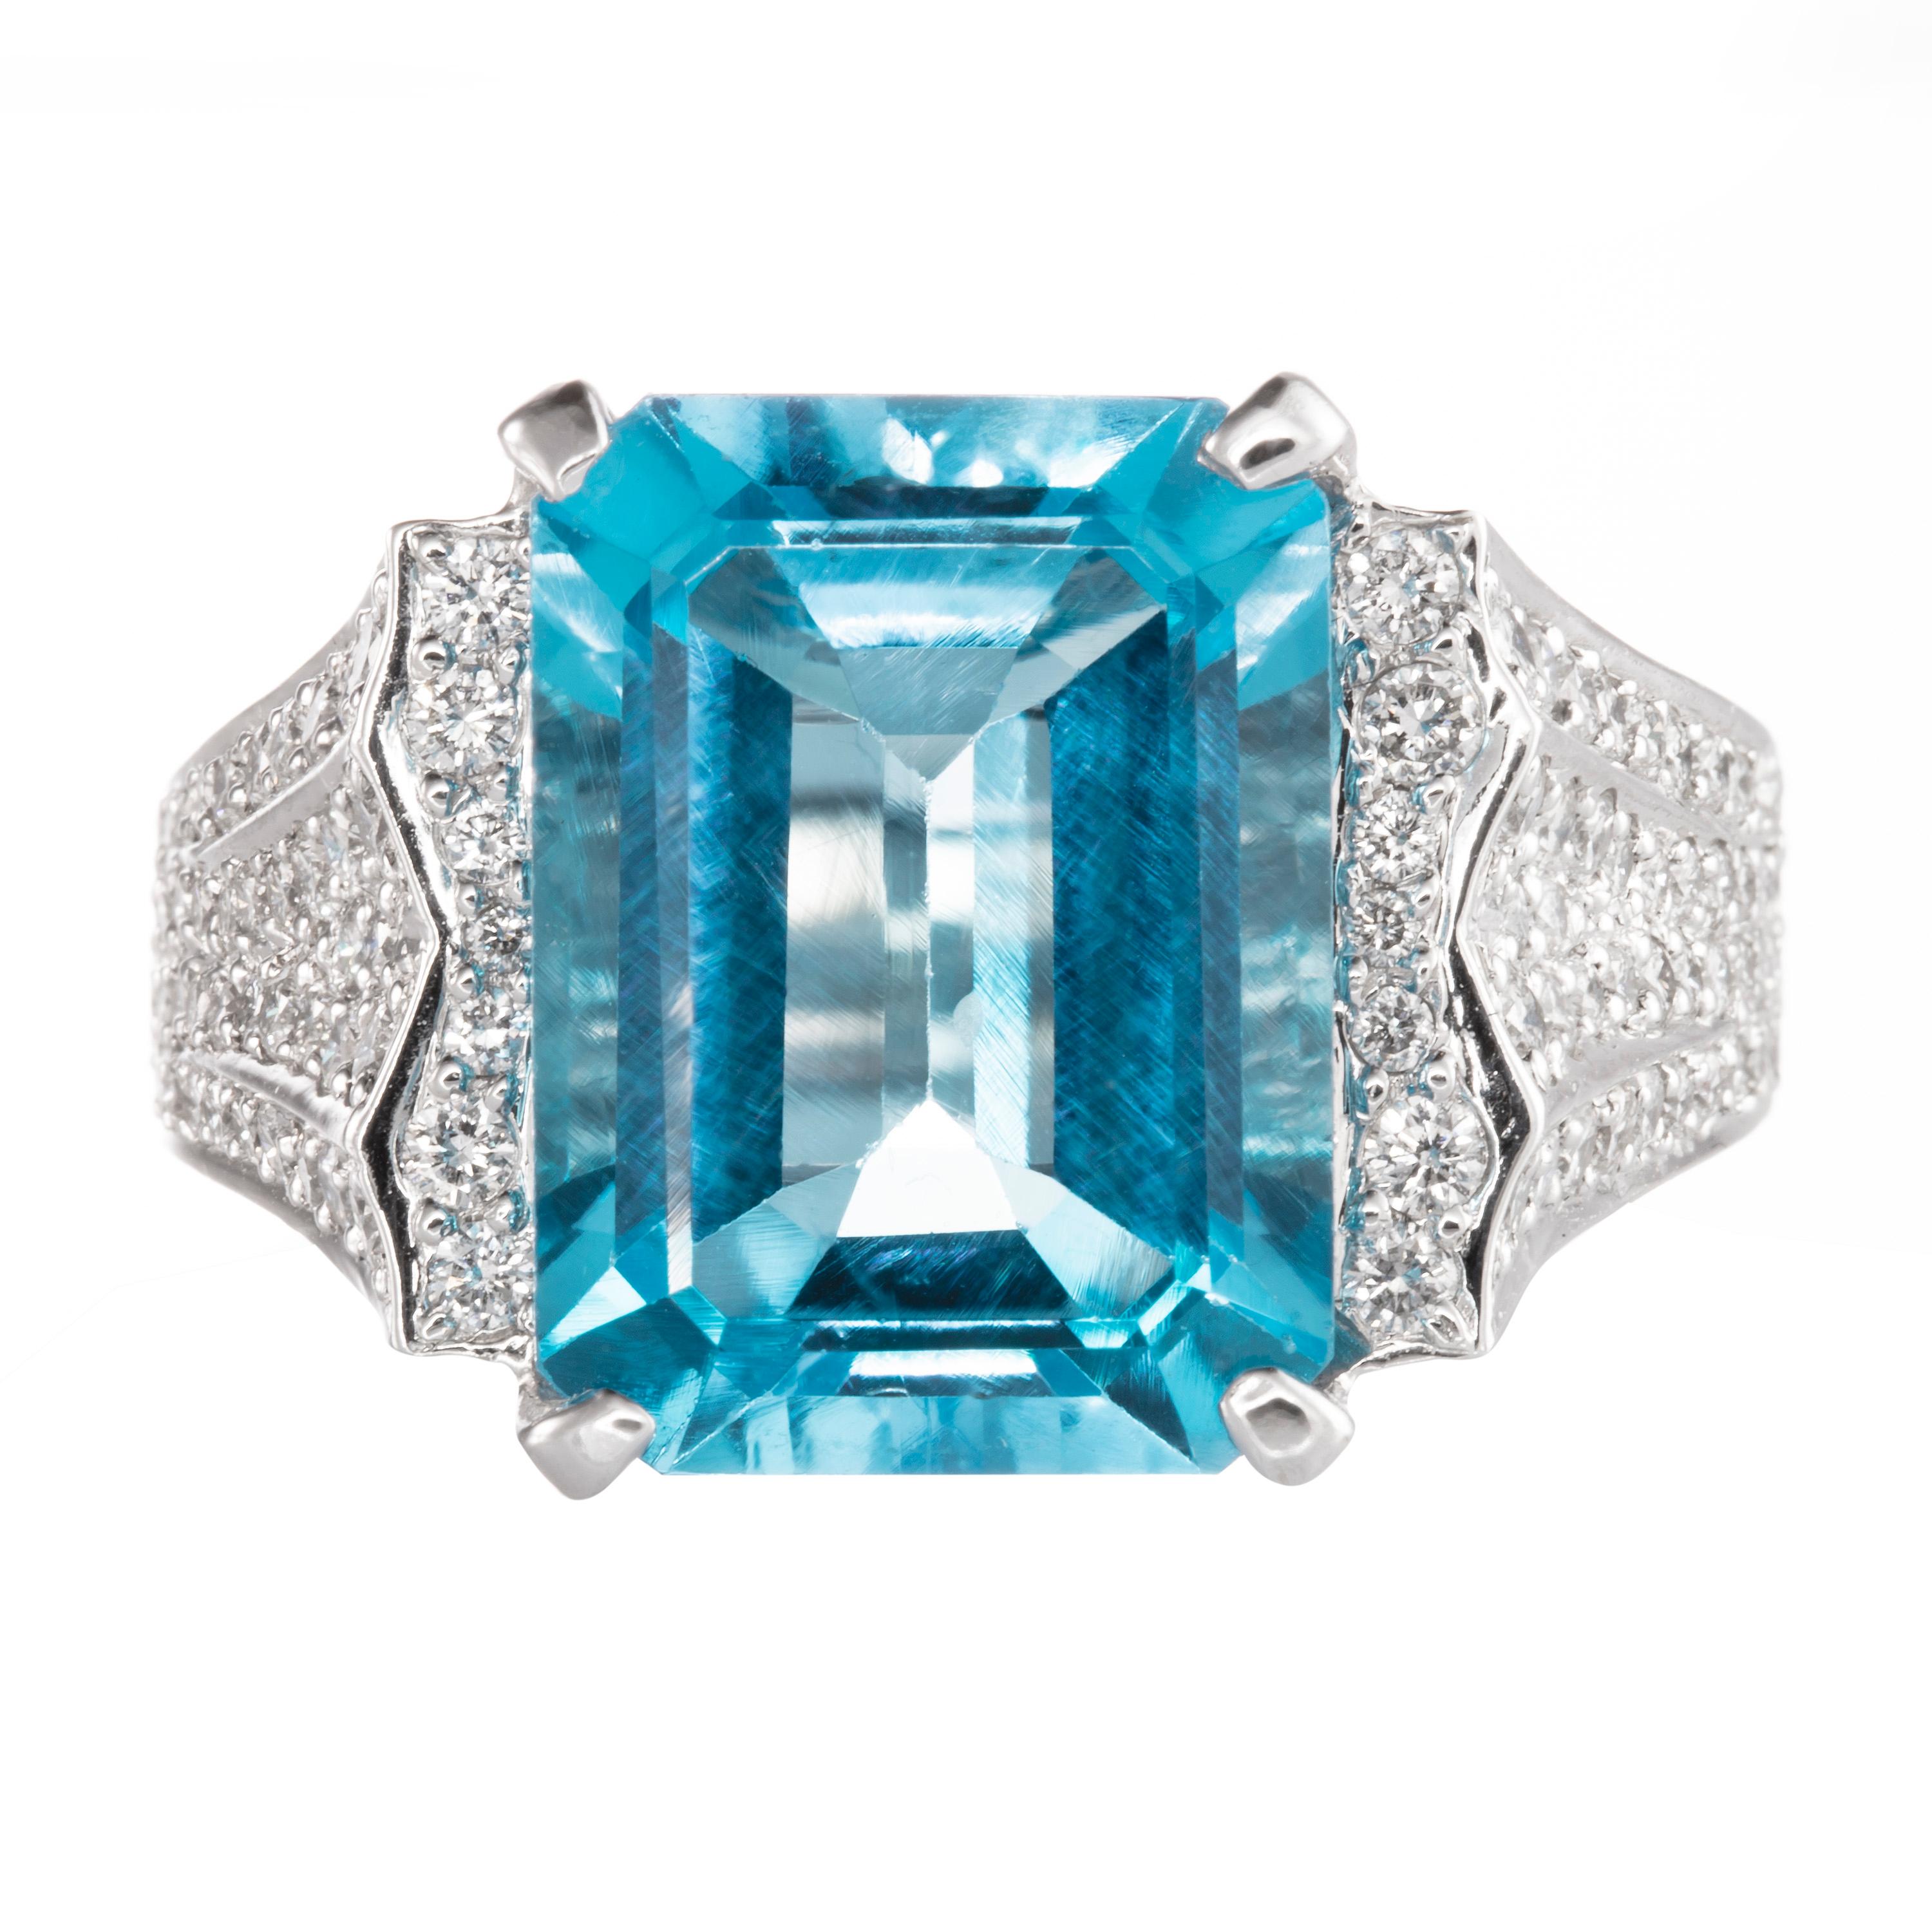 Cast from 18K white gold and adorned with 1.45 carats of white pave diamonds, this stunning ring has a 11.23 carat emerald-cut blue topaz at the center. Give it as a gift, or pick it out for your wedding.  Currently a ring size US 6.5.  For other